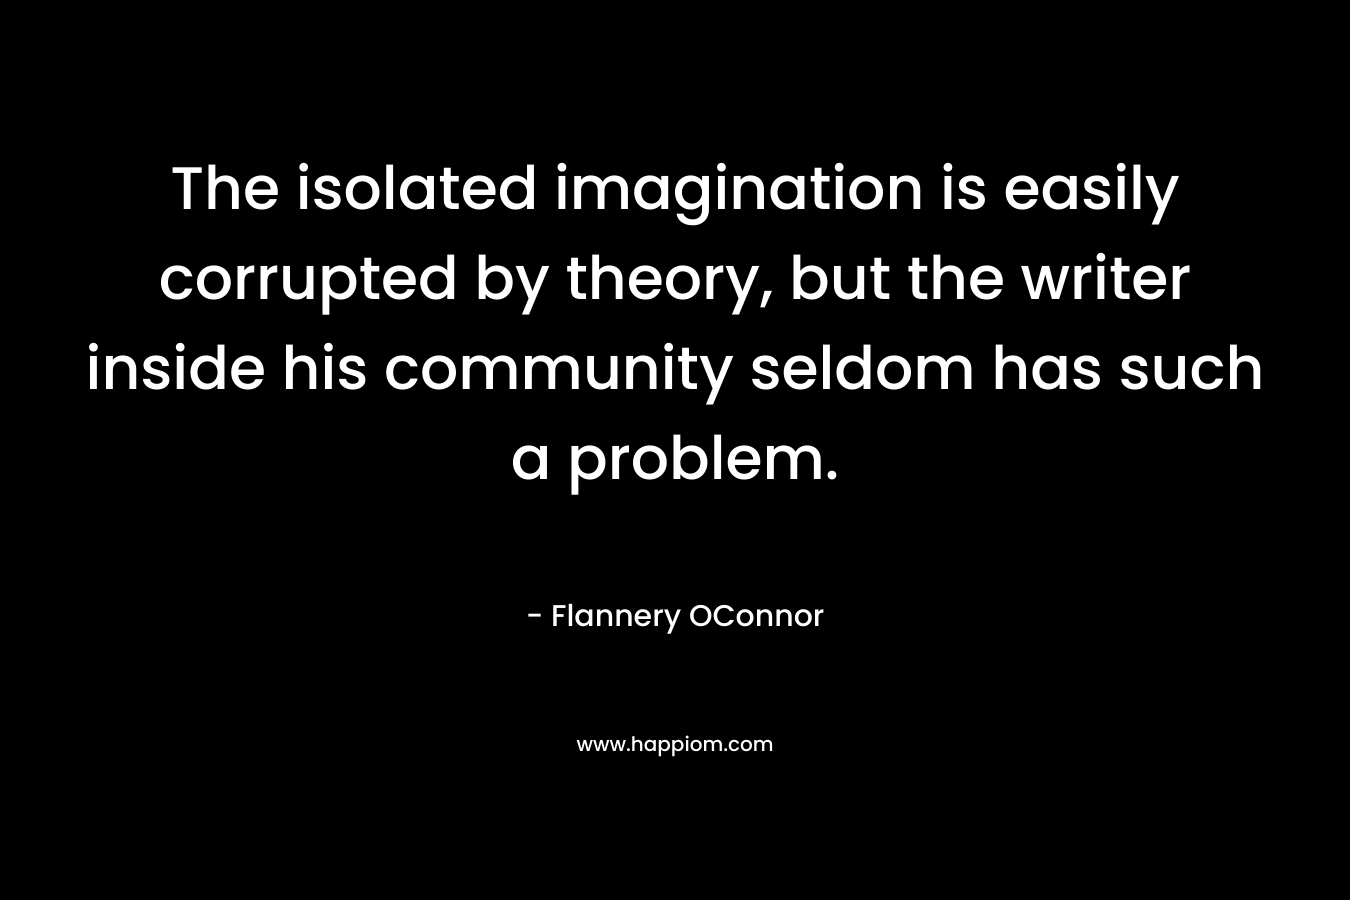 The isolated imagination is easily corrupted by theory, but the writer inside his community seldom has such a problem.